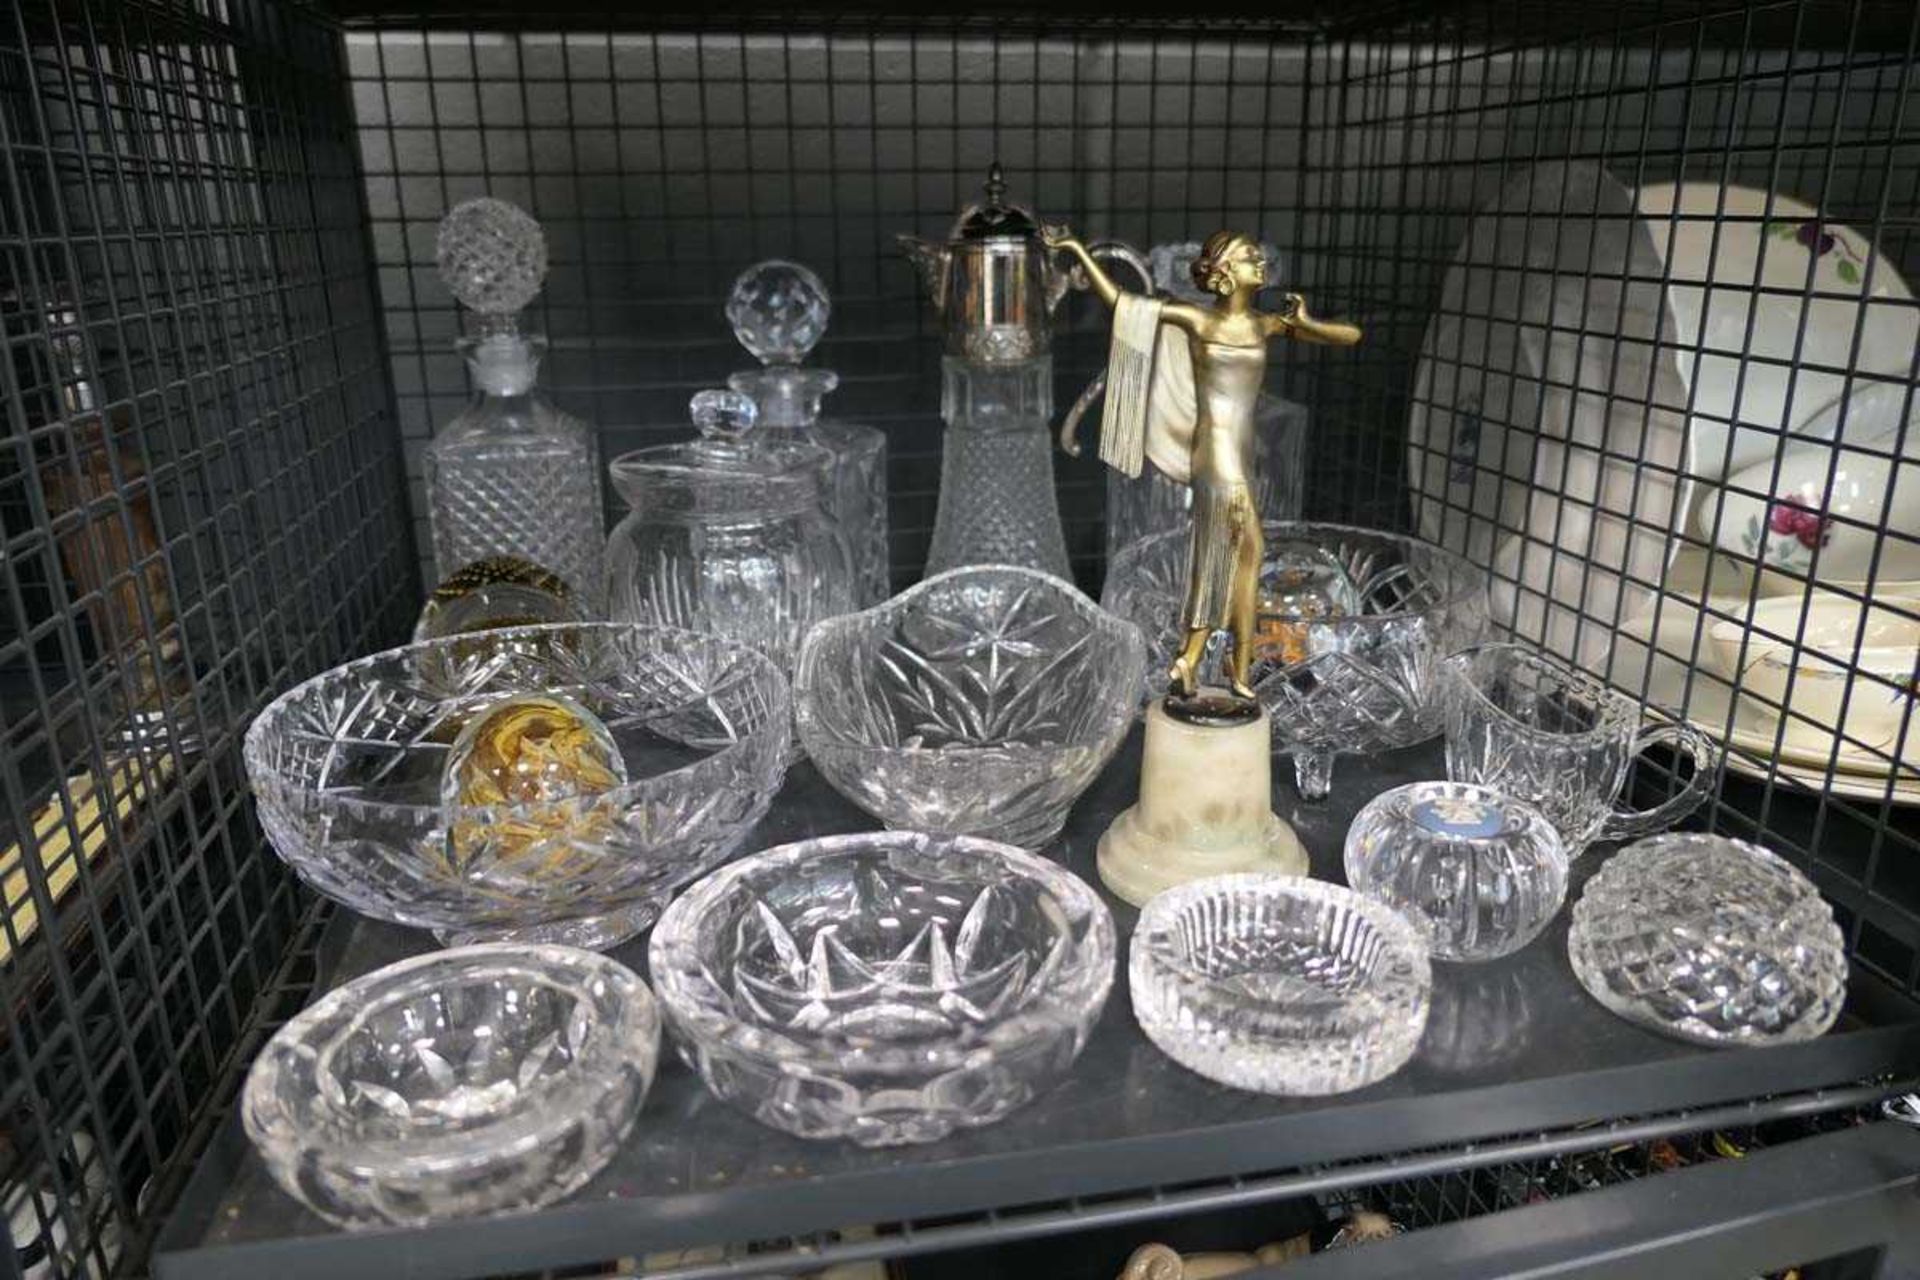 Cage containing a claret jug, decanters, biscuit barrel, paperweights, art deco style figure, jug